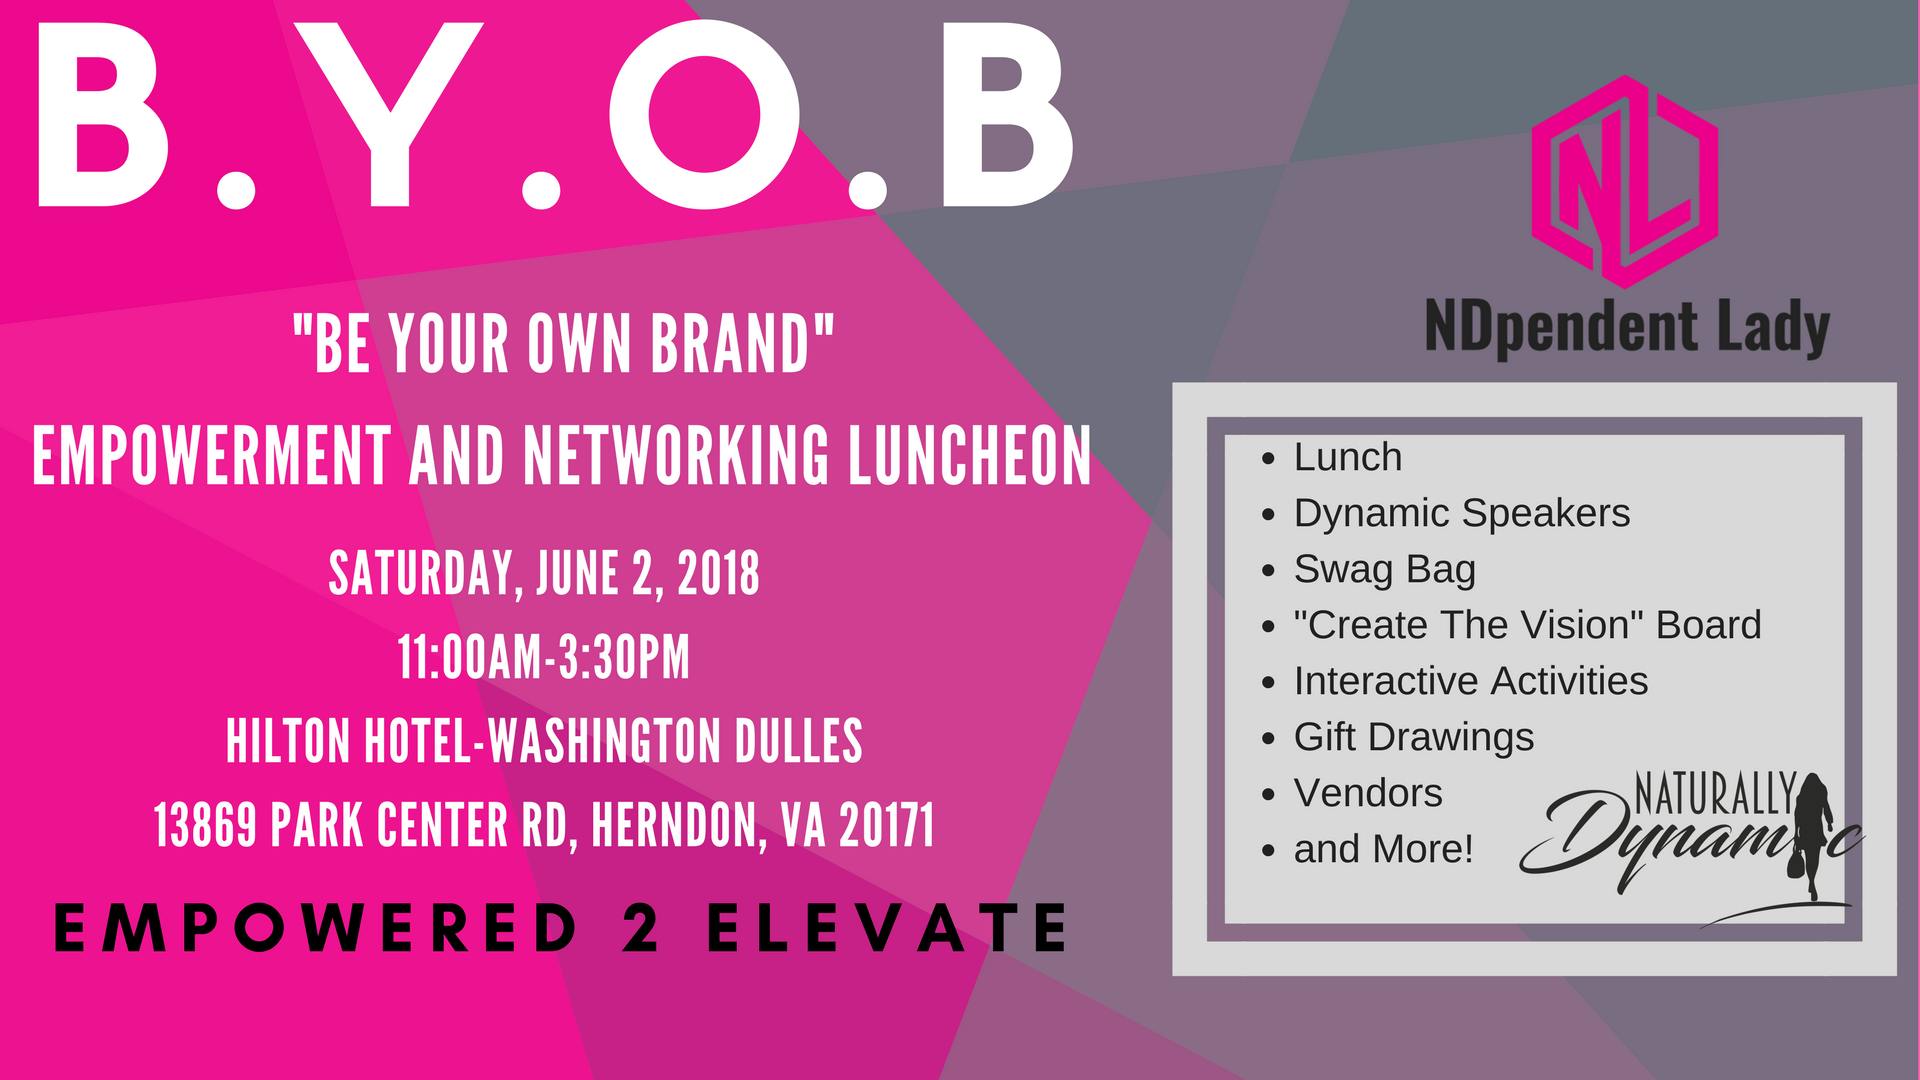 NDpendent Lady B.Y.O.B.Be Your Own BrandEmpowerment & Networking Luncheon